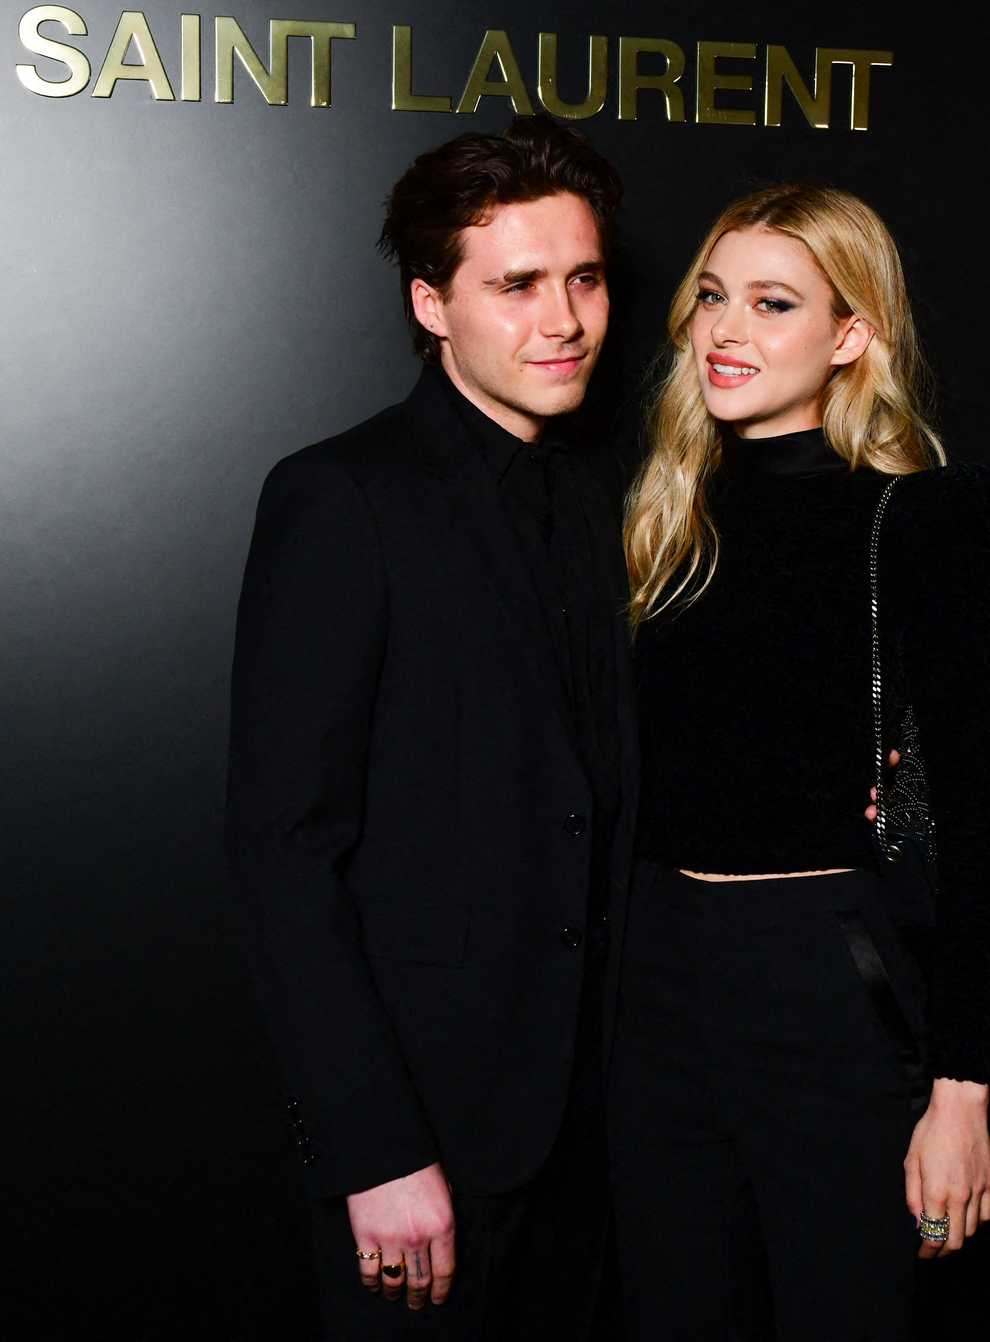 Brooklyn Beckham is believed to have popped the question to his girlfriend Nicola Peltz